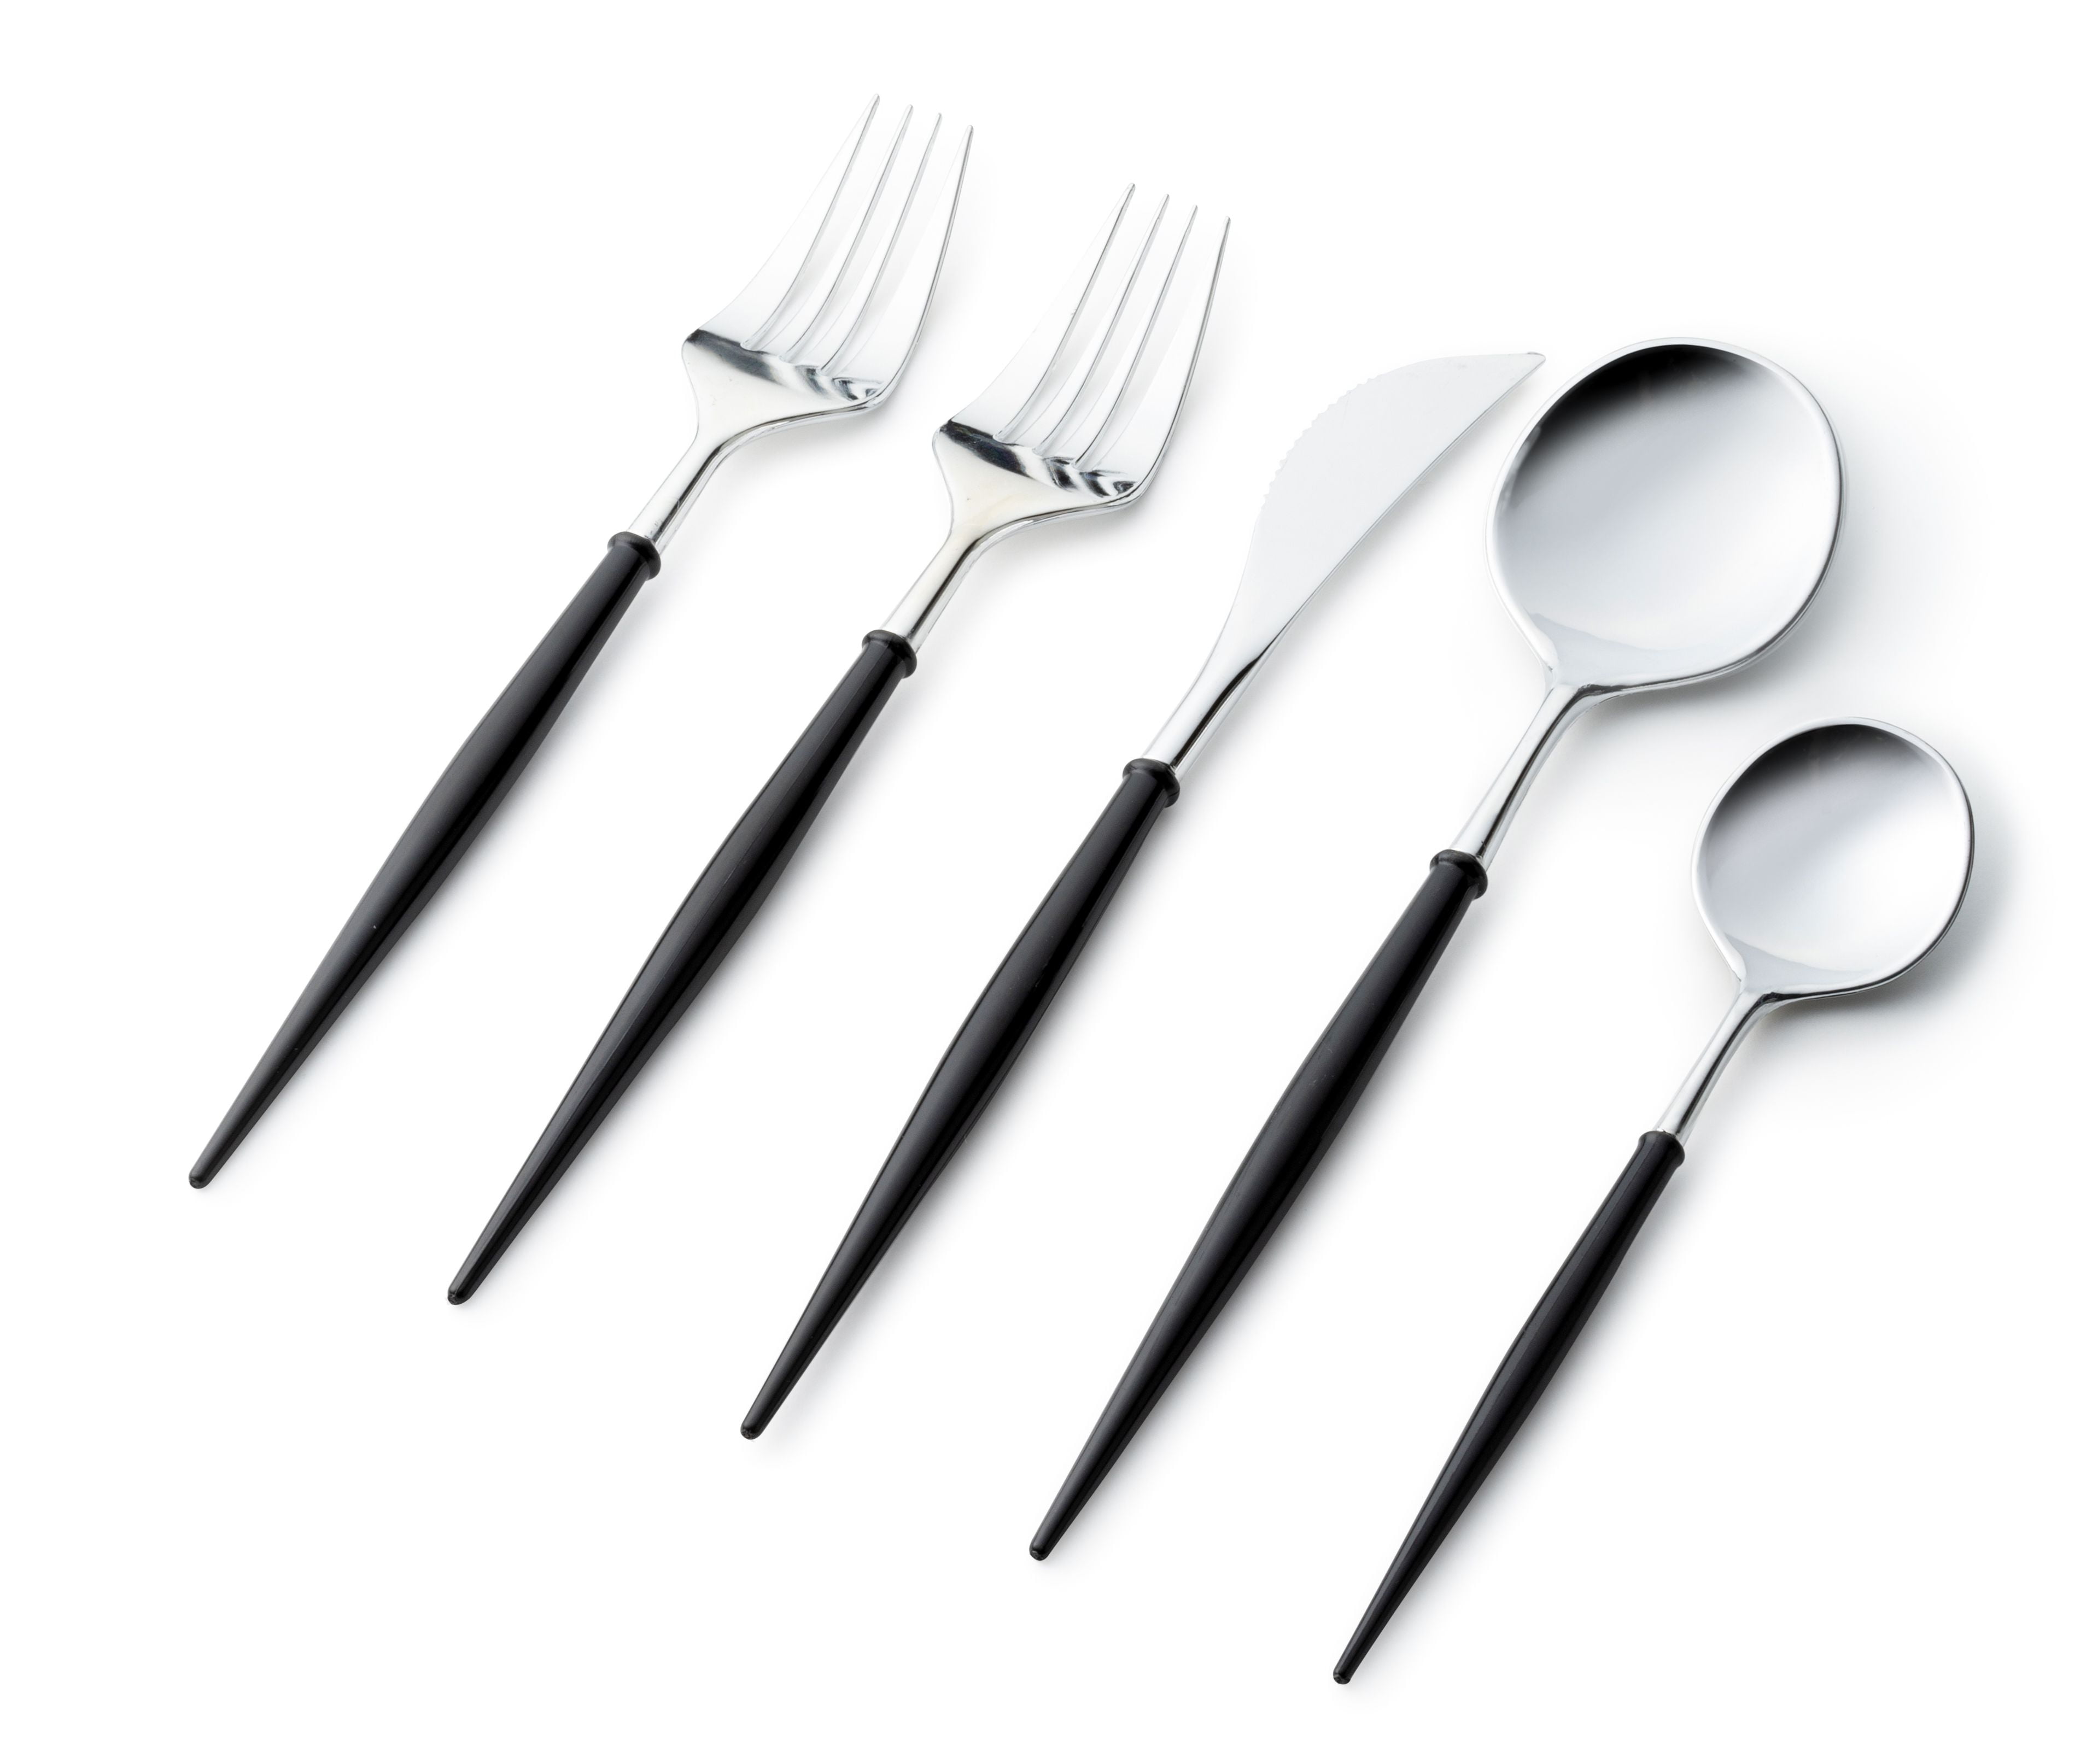 Weddings Knives- Fancy Flatware Utensil Set for Dinner Salad Modern Plastic Cutlery Set-40 Set- Disposable Forks Catering Reusable- For Parties Spoons Tea- Heavy Duty Handle Soup